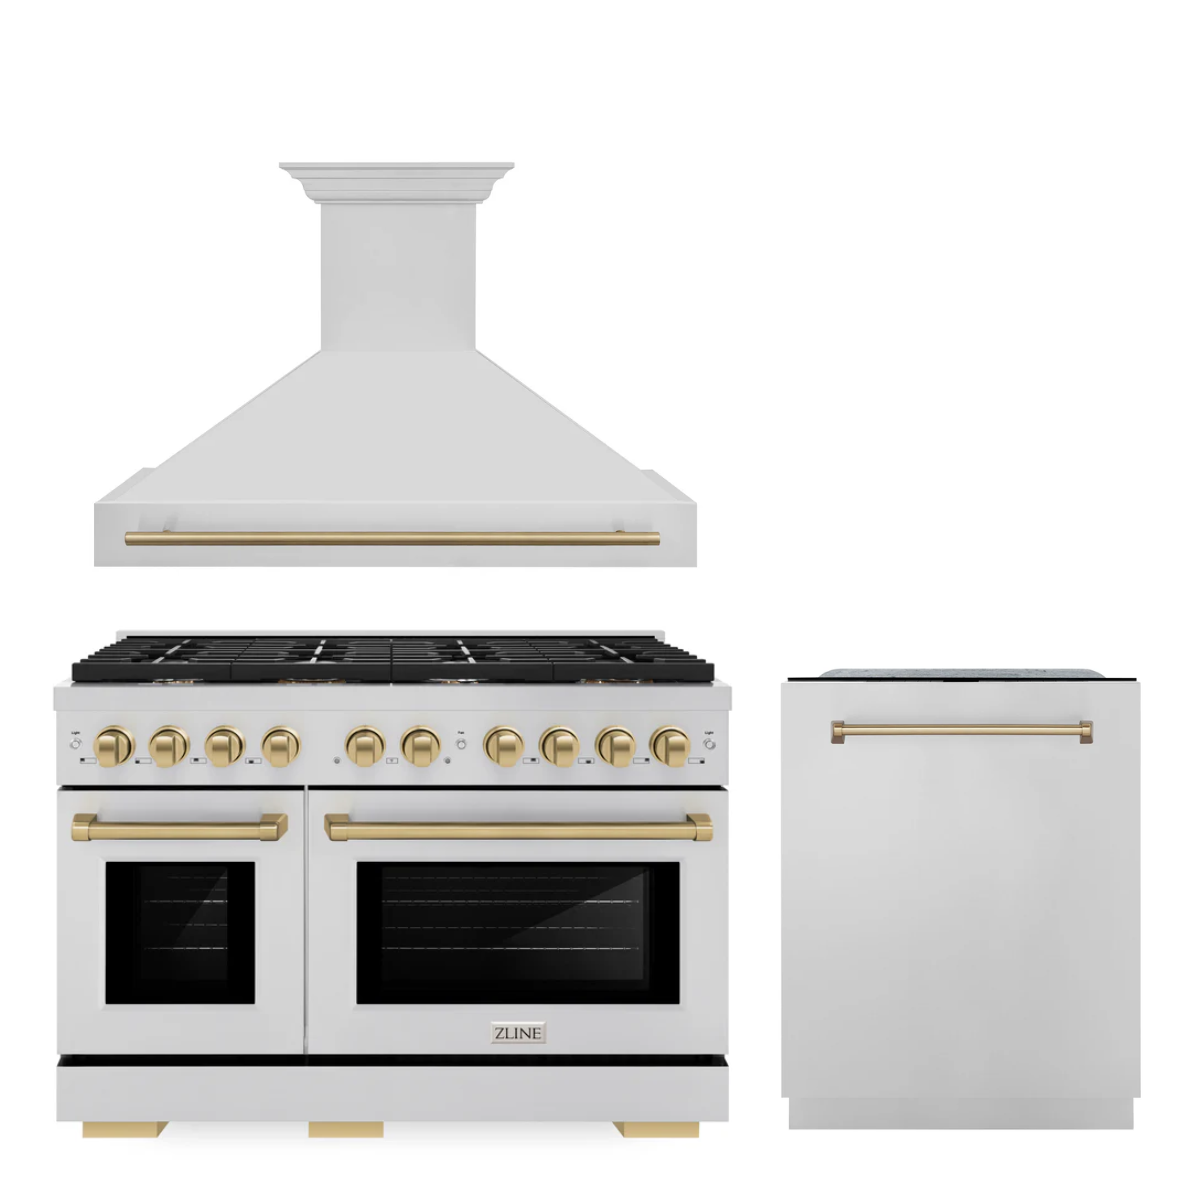 ZLINE Autograph Package - 48 In. Gas Range, Range Hood and Dishwasher in Stainless Steel with Champagne Bronze Accents, 3AKPR-RGRH48-CB